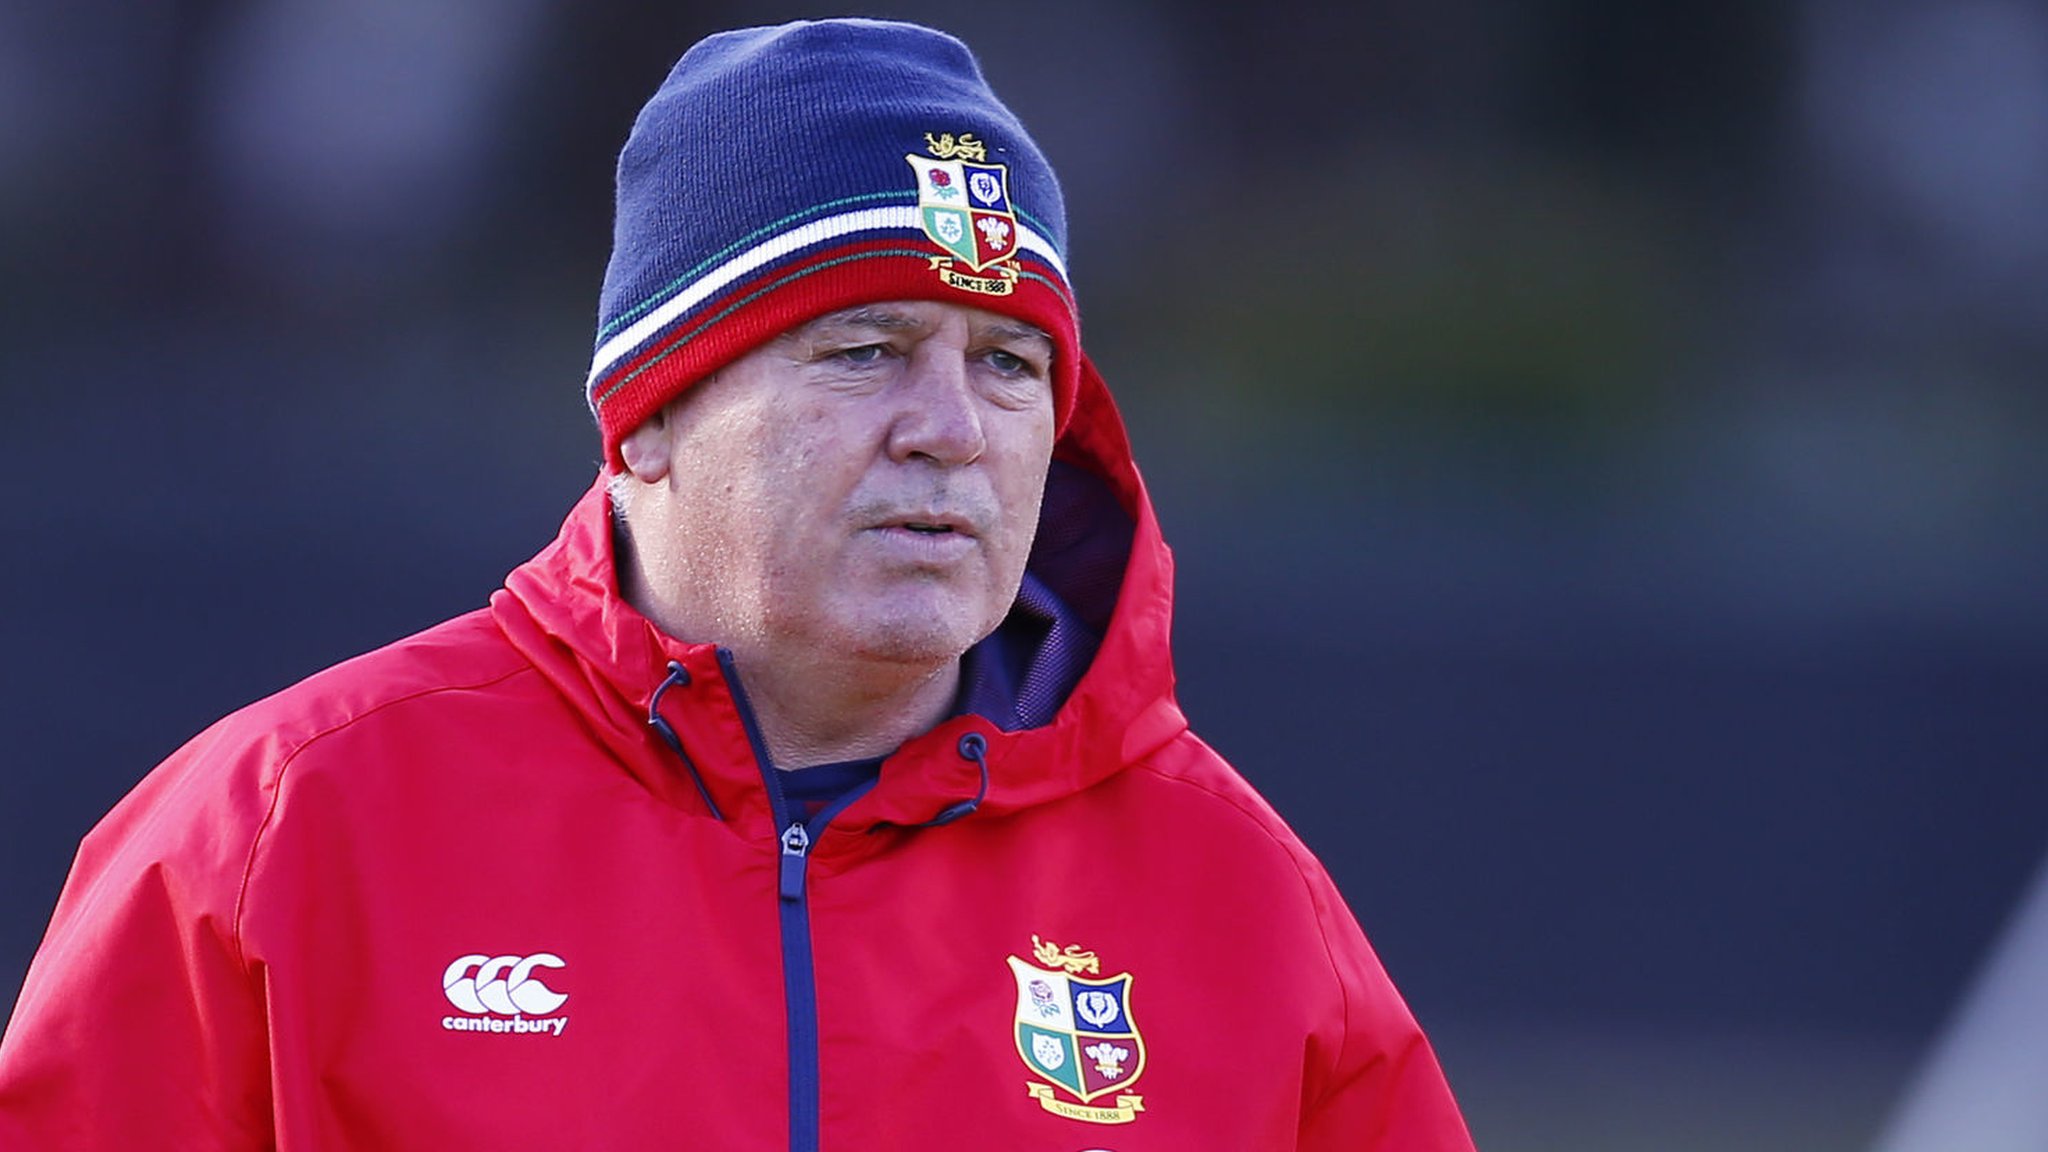 British and Irish Lions furious at having South African TMO for first Test against Springboks